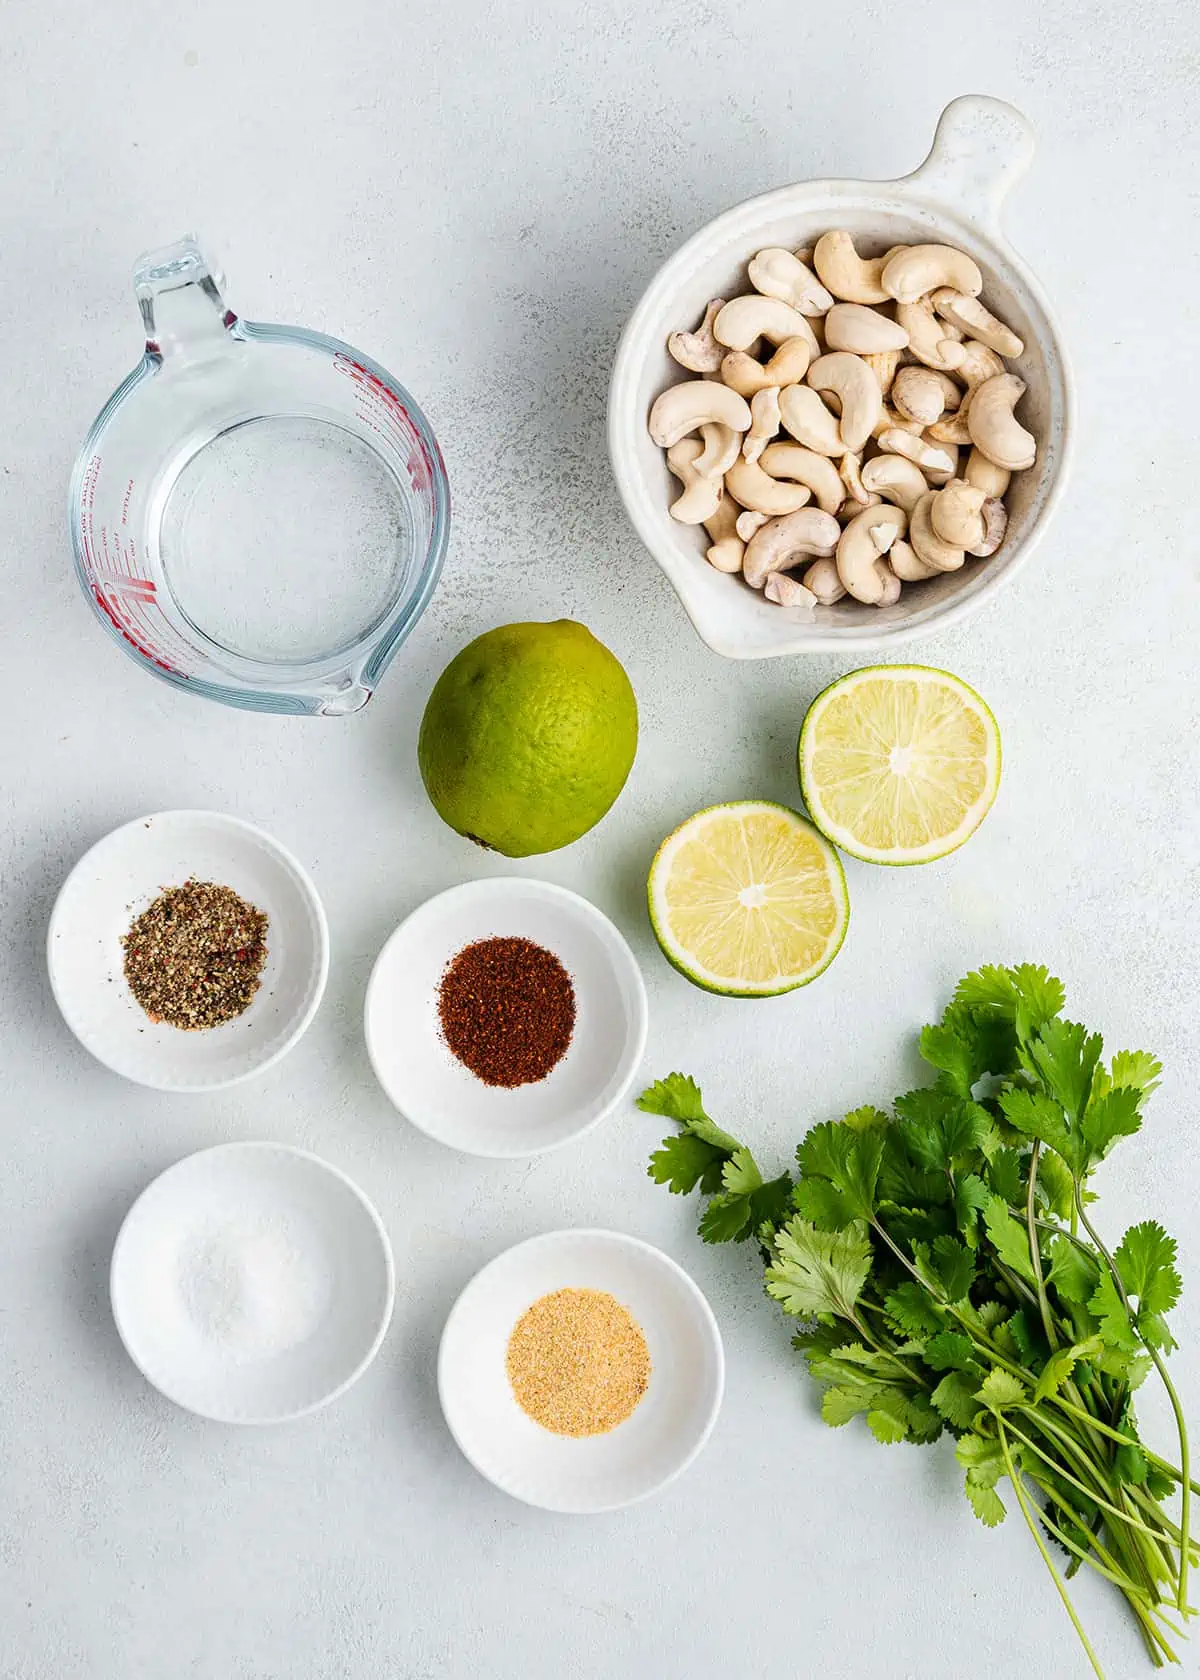 Overhead view of the ingredients needed for cilantro lime sauce: a bowl of cashews, a pyrex of water, a bowl of salt, a bowl of pepper, a bowl of chili powder, a bowl of garlic powder, a bunch of cilantro, a whole lime, and a lime cut in half